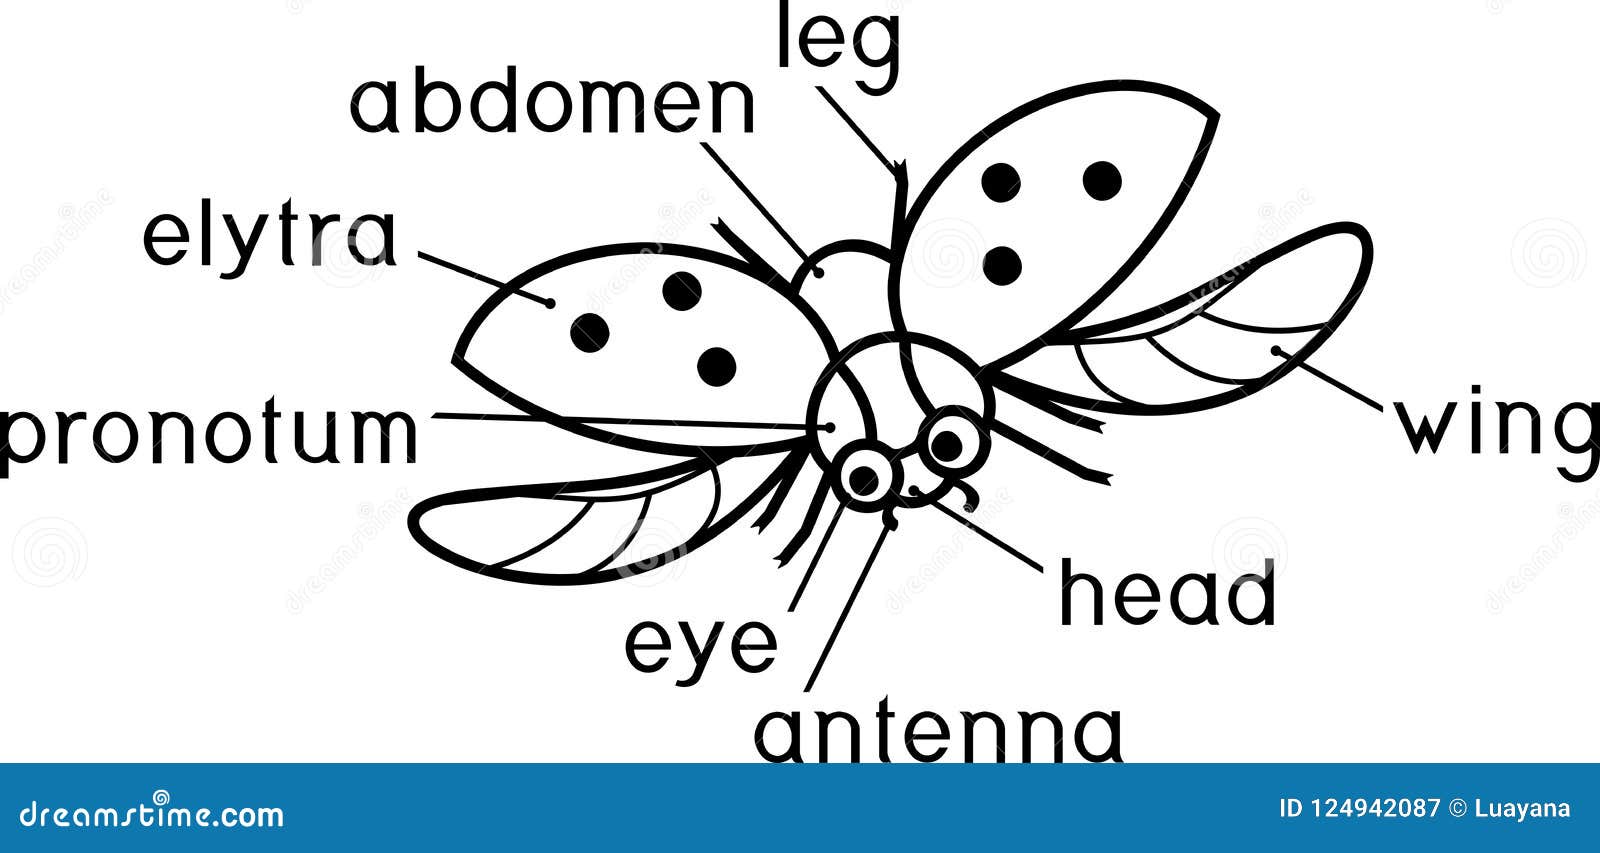 external structure of insect coloring page. parts of body of flying ladybug with titles